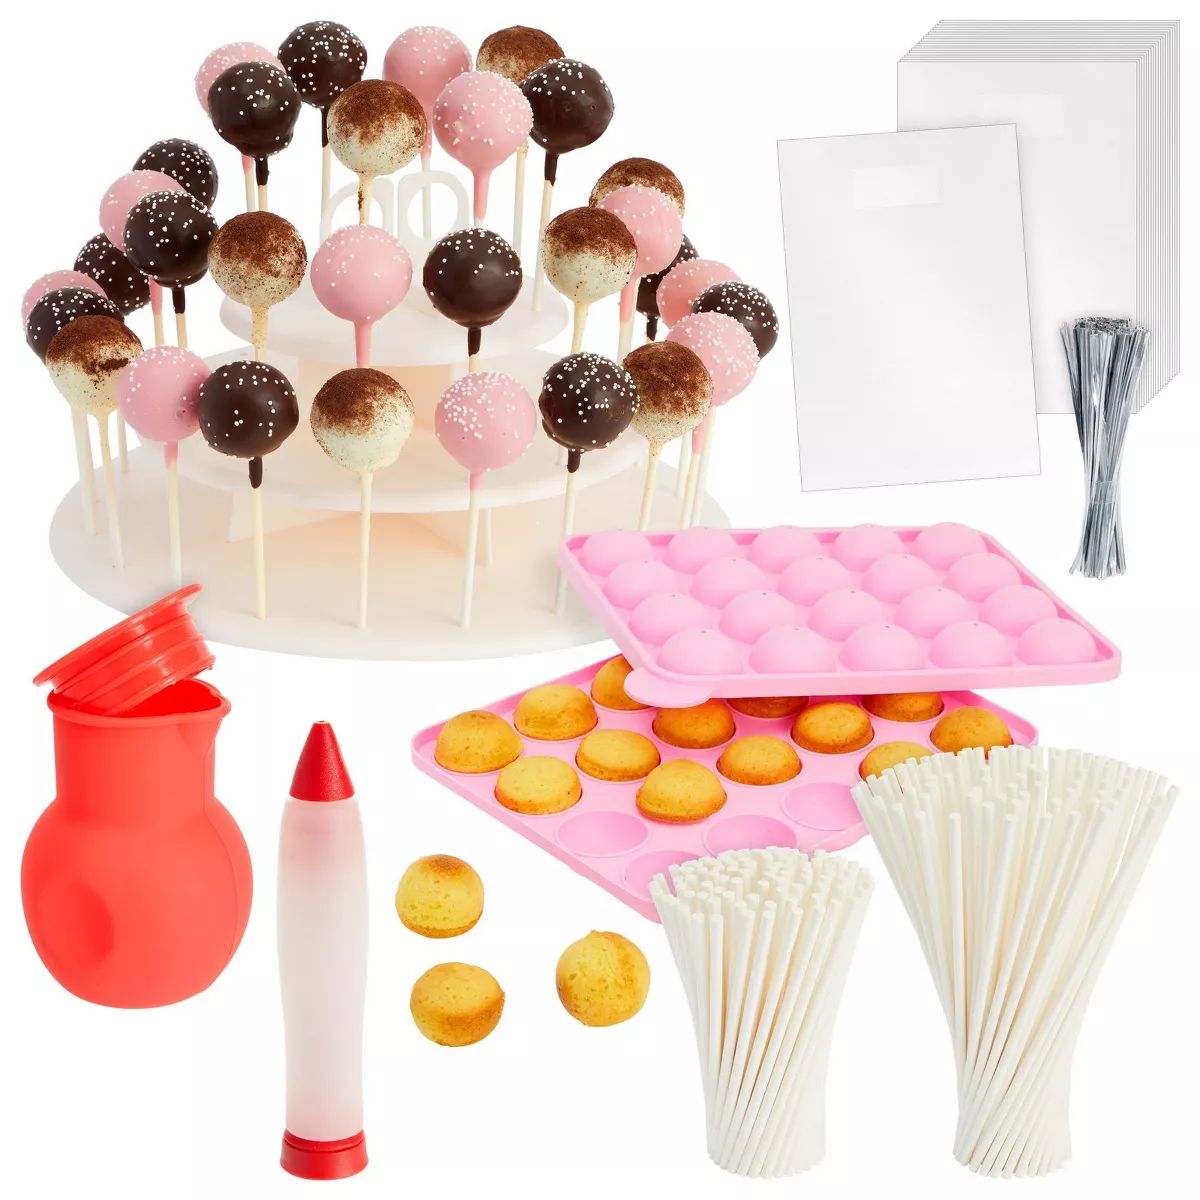 Bright Creations 404 Piece Cake Pop Cakesicles Kit with Mold, Stand, and 200 Sticks | Target